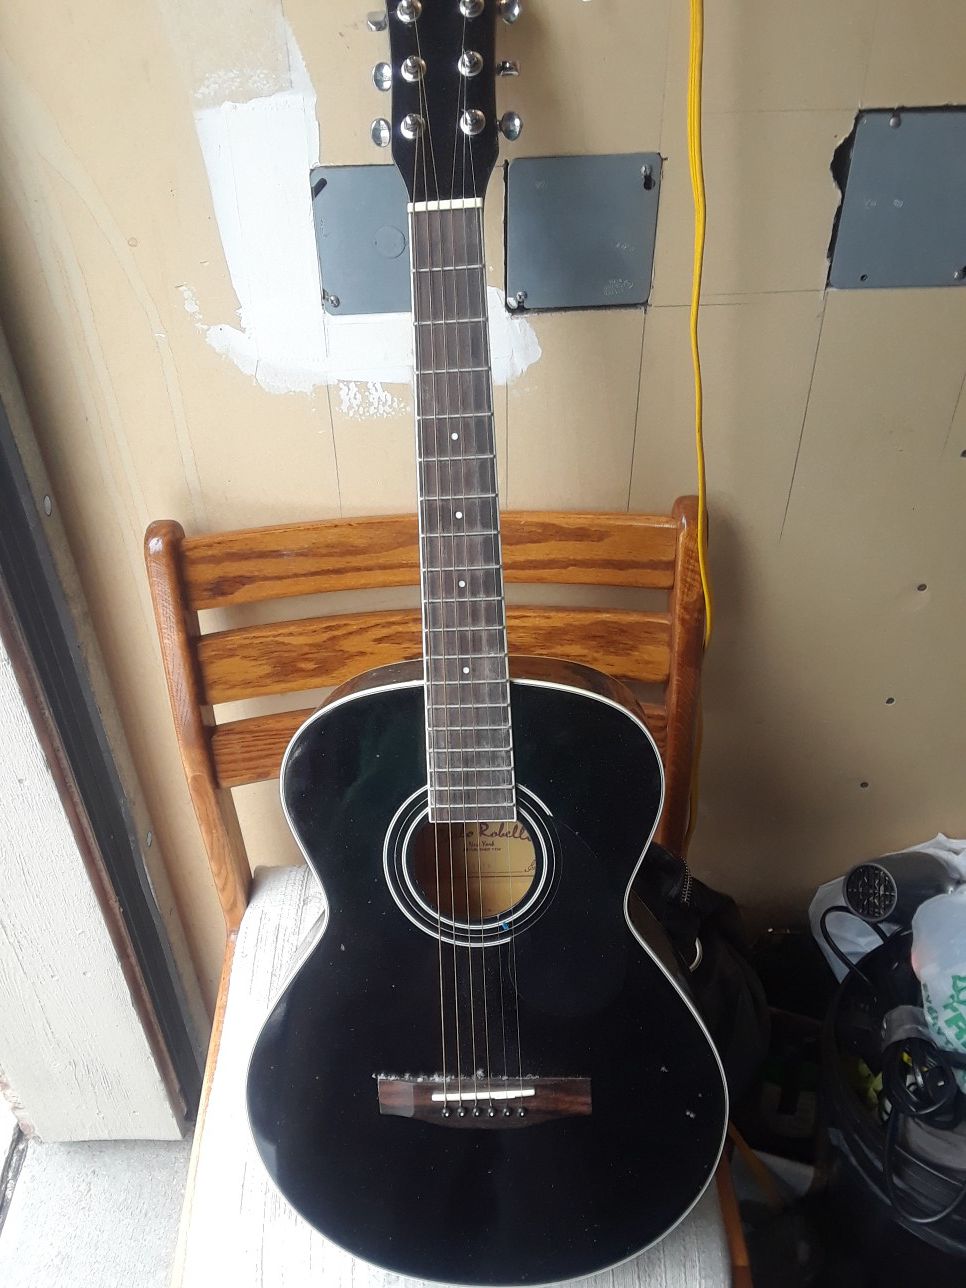 Carlo robelli new york acoustic guitar with case.